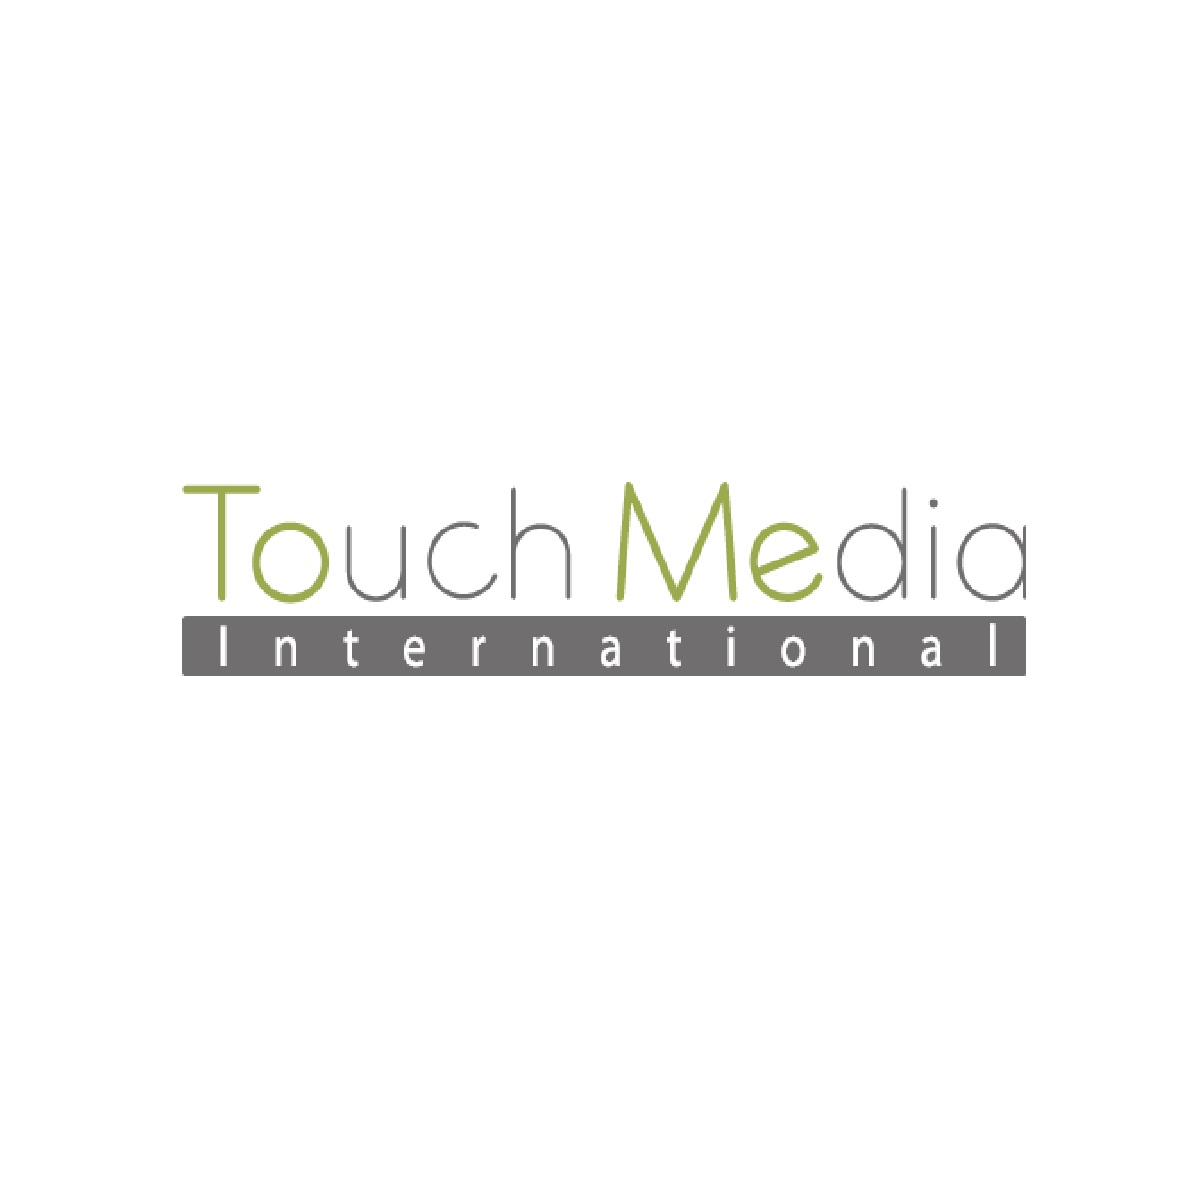 Touch Media